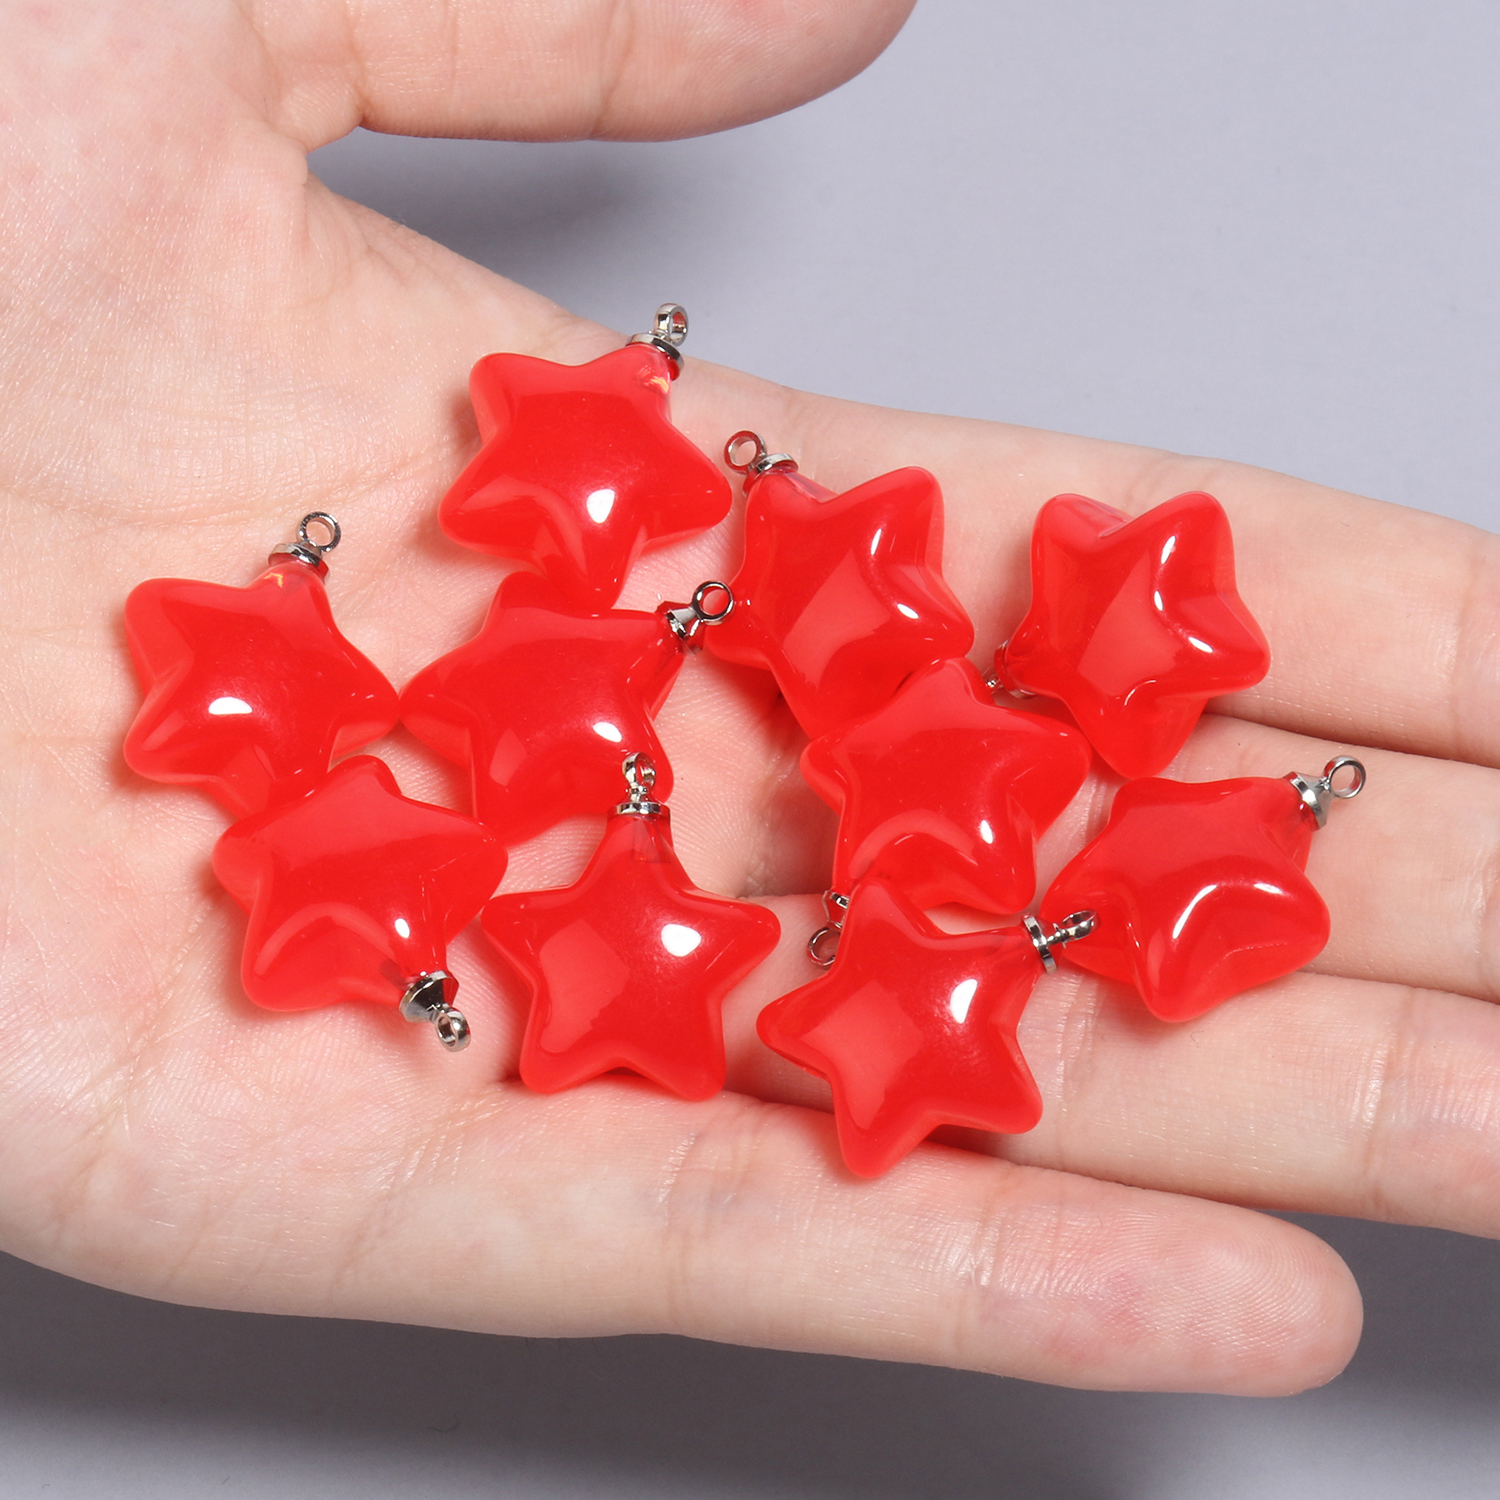 6pc Red Bow Charms, #420 jewelry making, earring charms, bow charms,  earring making, charms for earrings, jewelry charm